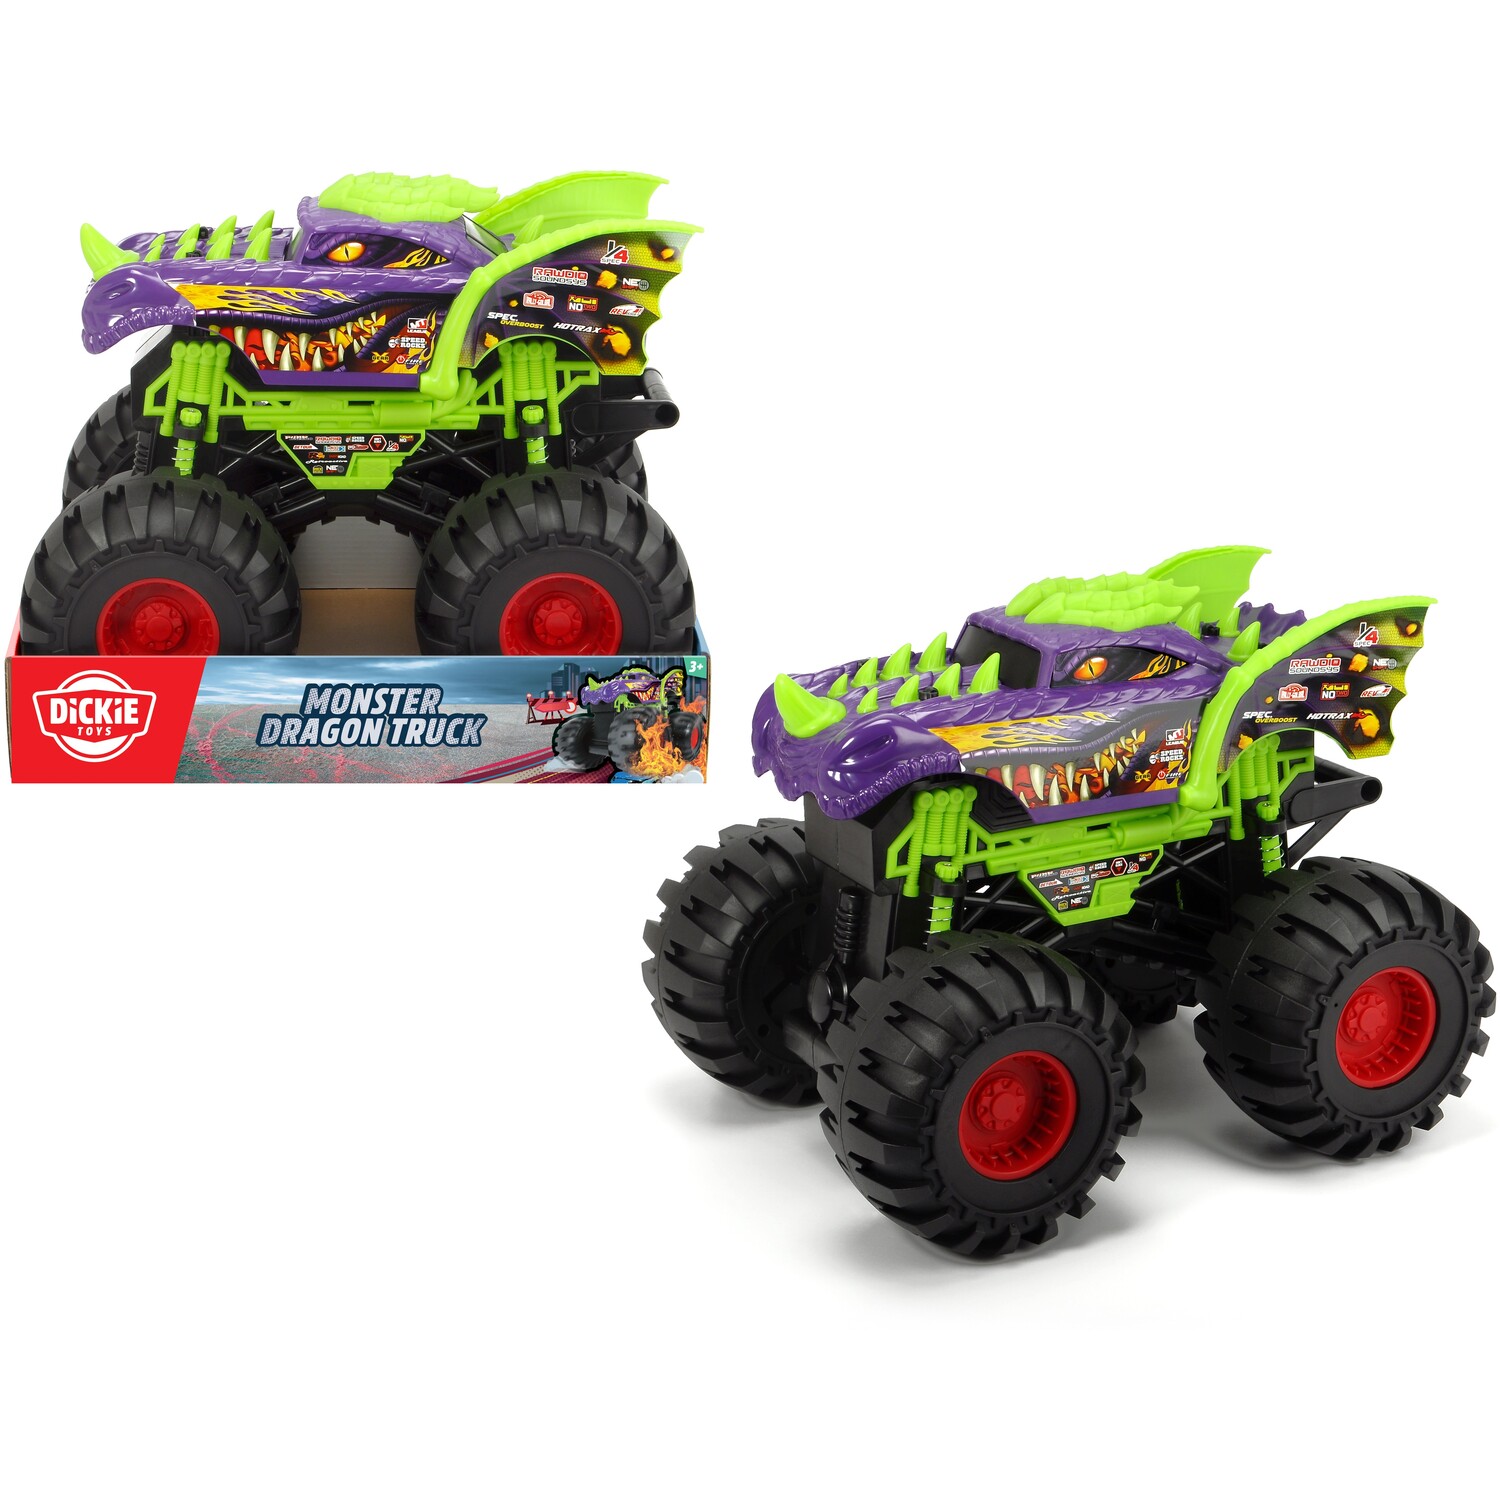 Single Monster Dragon Truck Green in Assorted styles Image